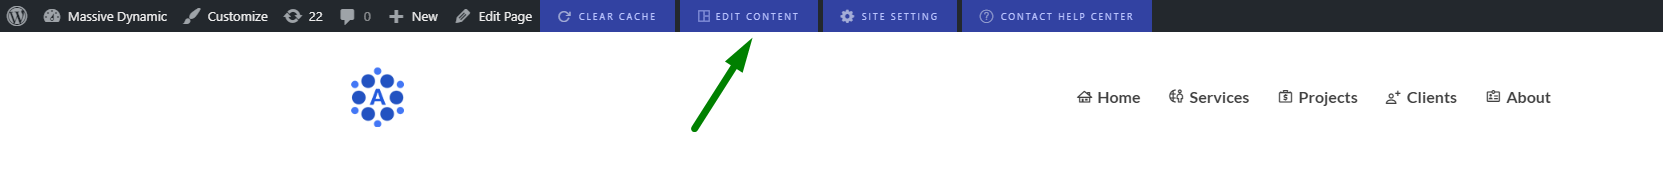 Edit Content button at the top of the Massive Dynamic page